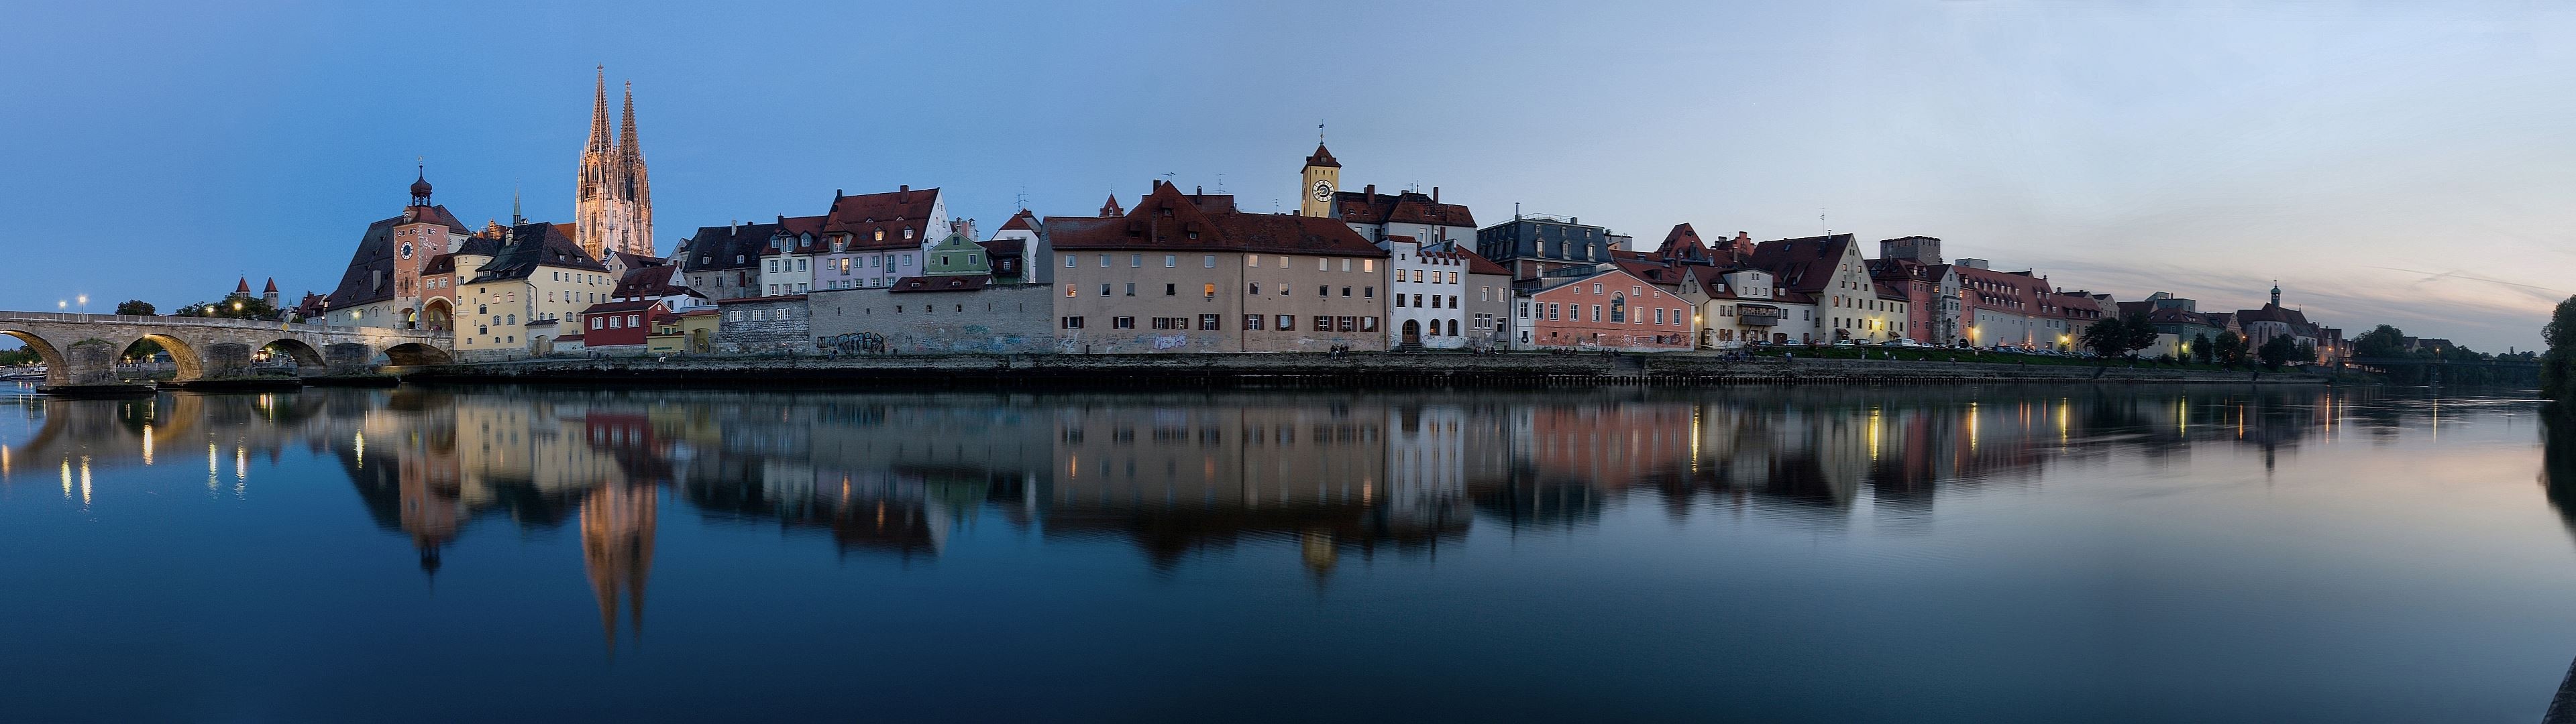 Regensburg Germany City Reflection River Sunset Multiple Display Dual Monitors Without People 3840x1080